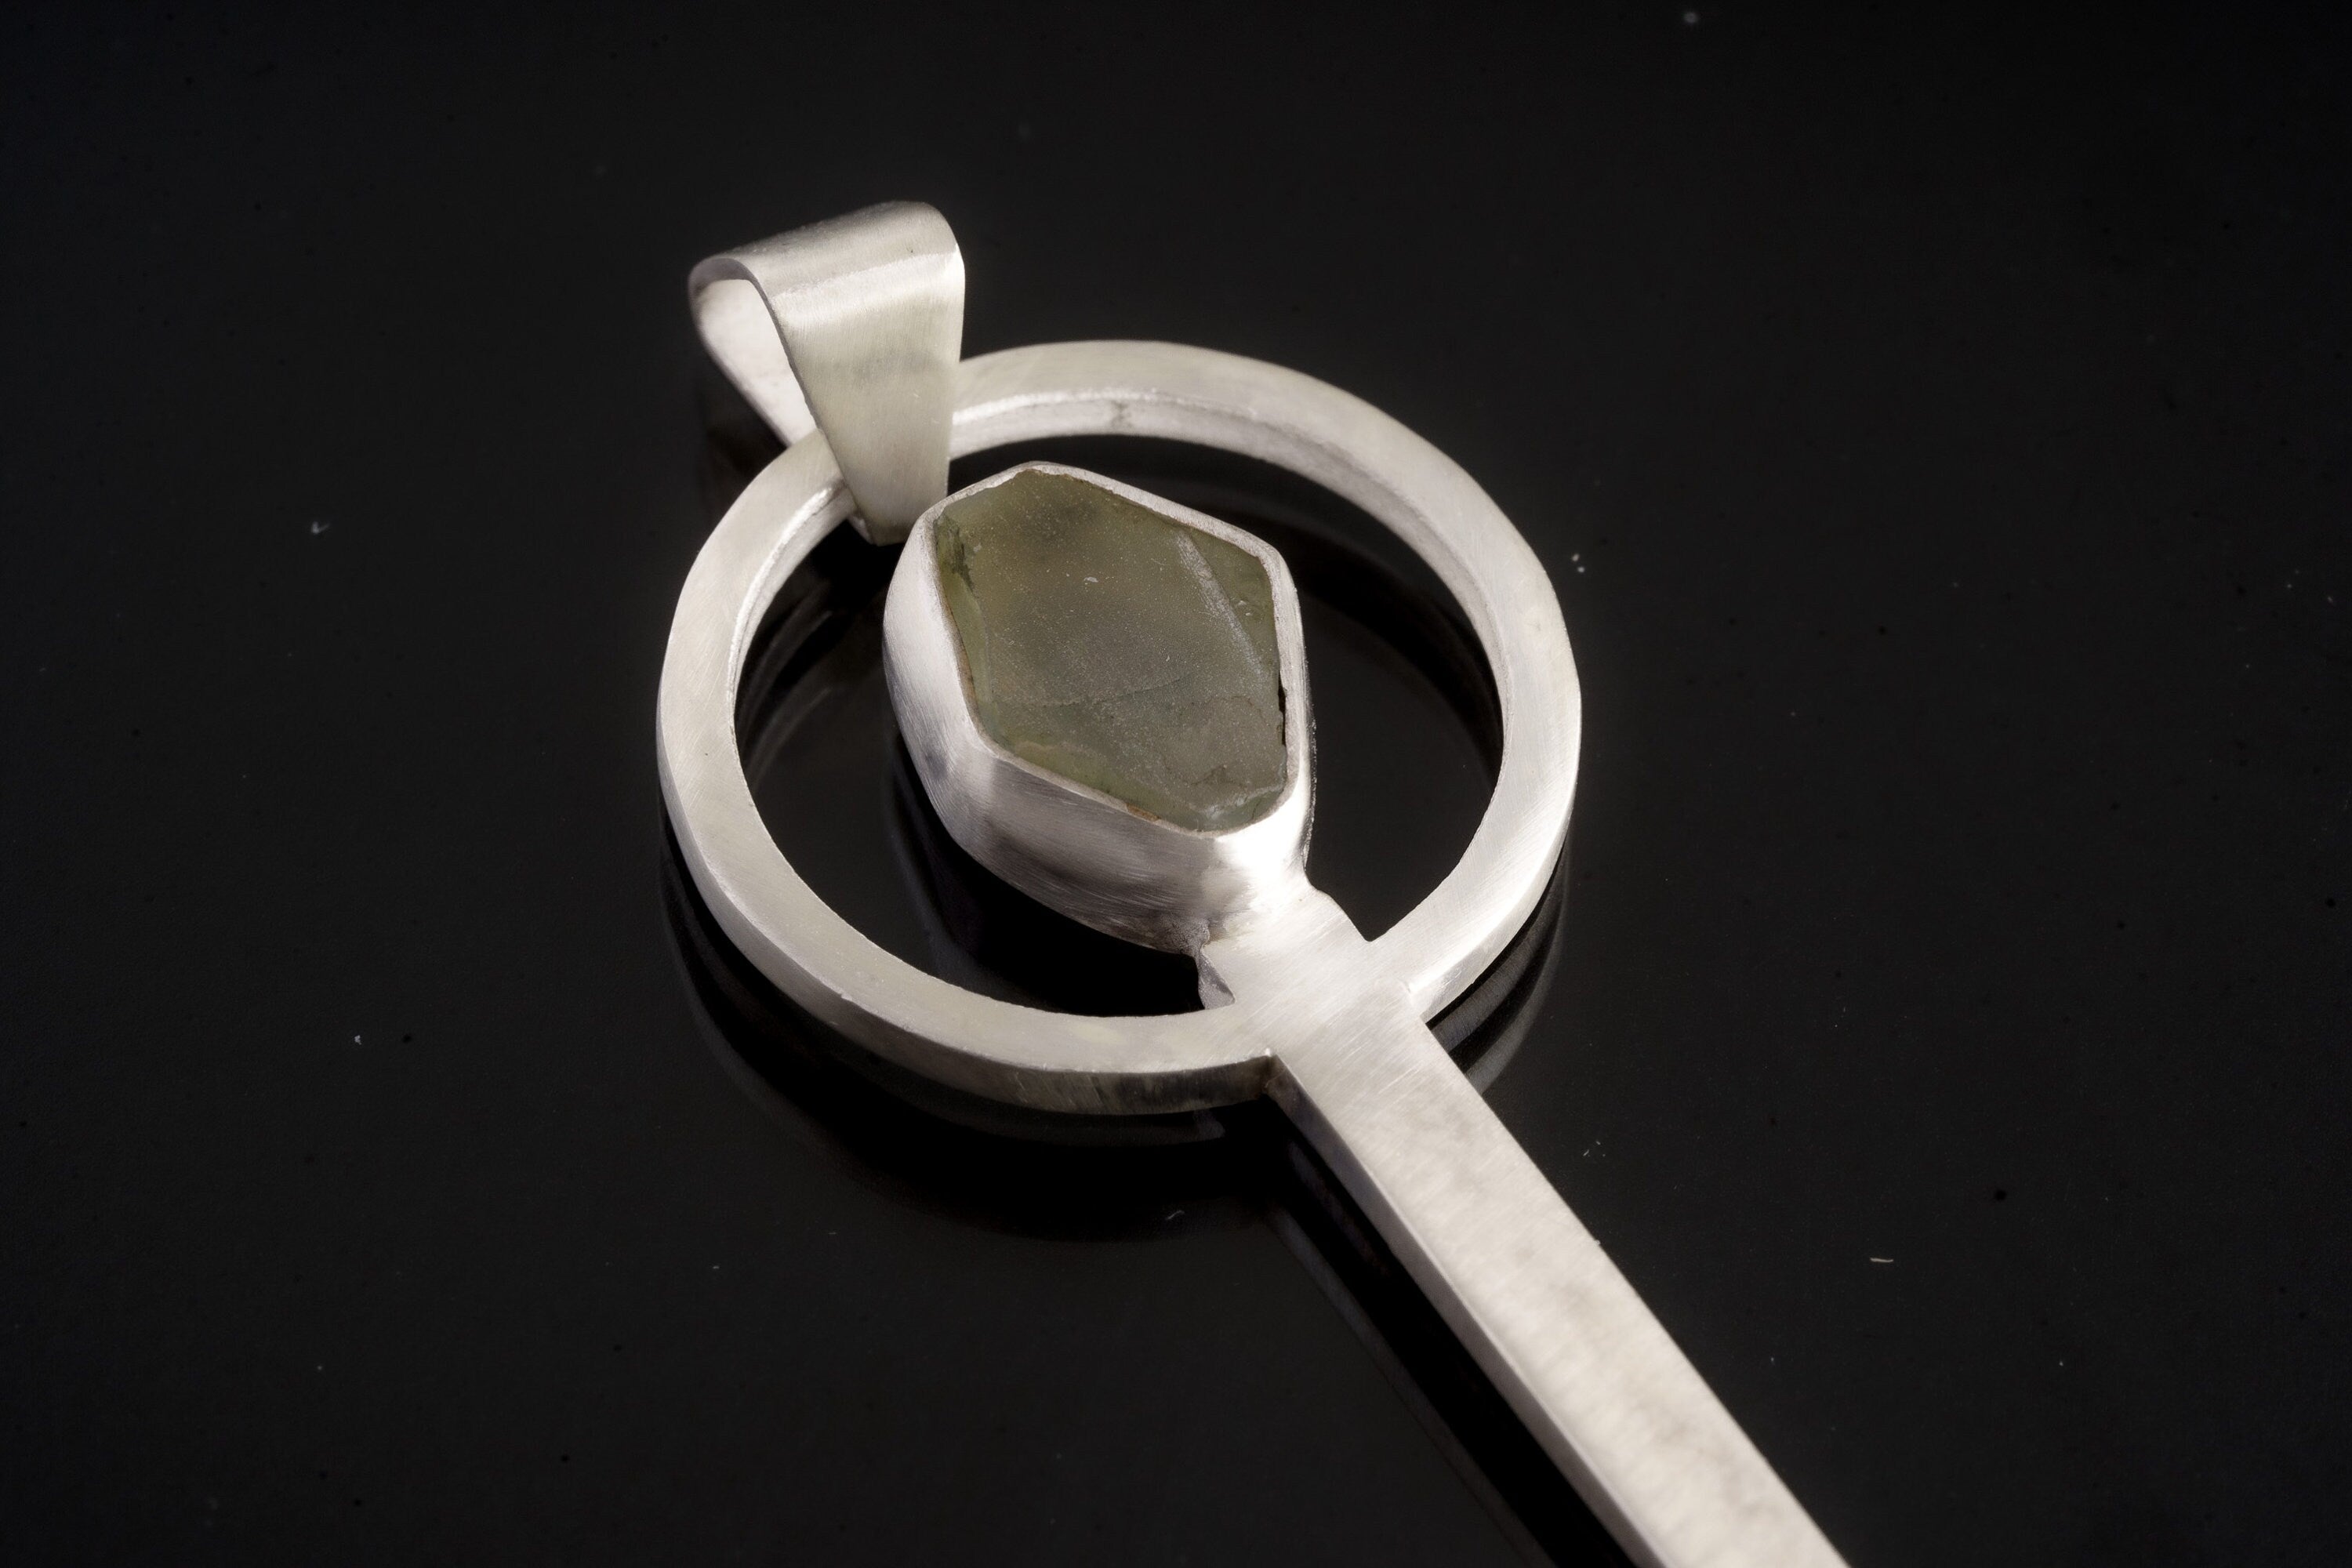 Himalayan Aquamarine - Small Spice / Ceremonial Spoon - Solid 925 Cast Silver - Unique Brush Textured - Crystal Pendant Necklace